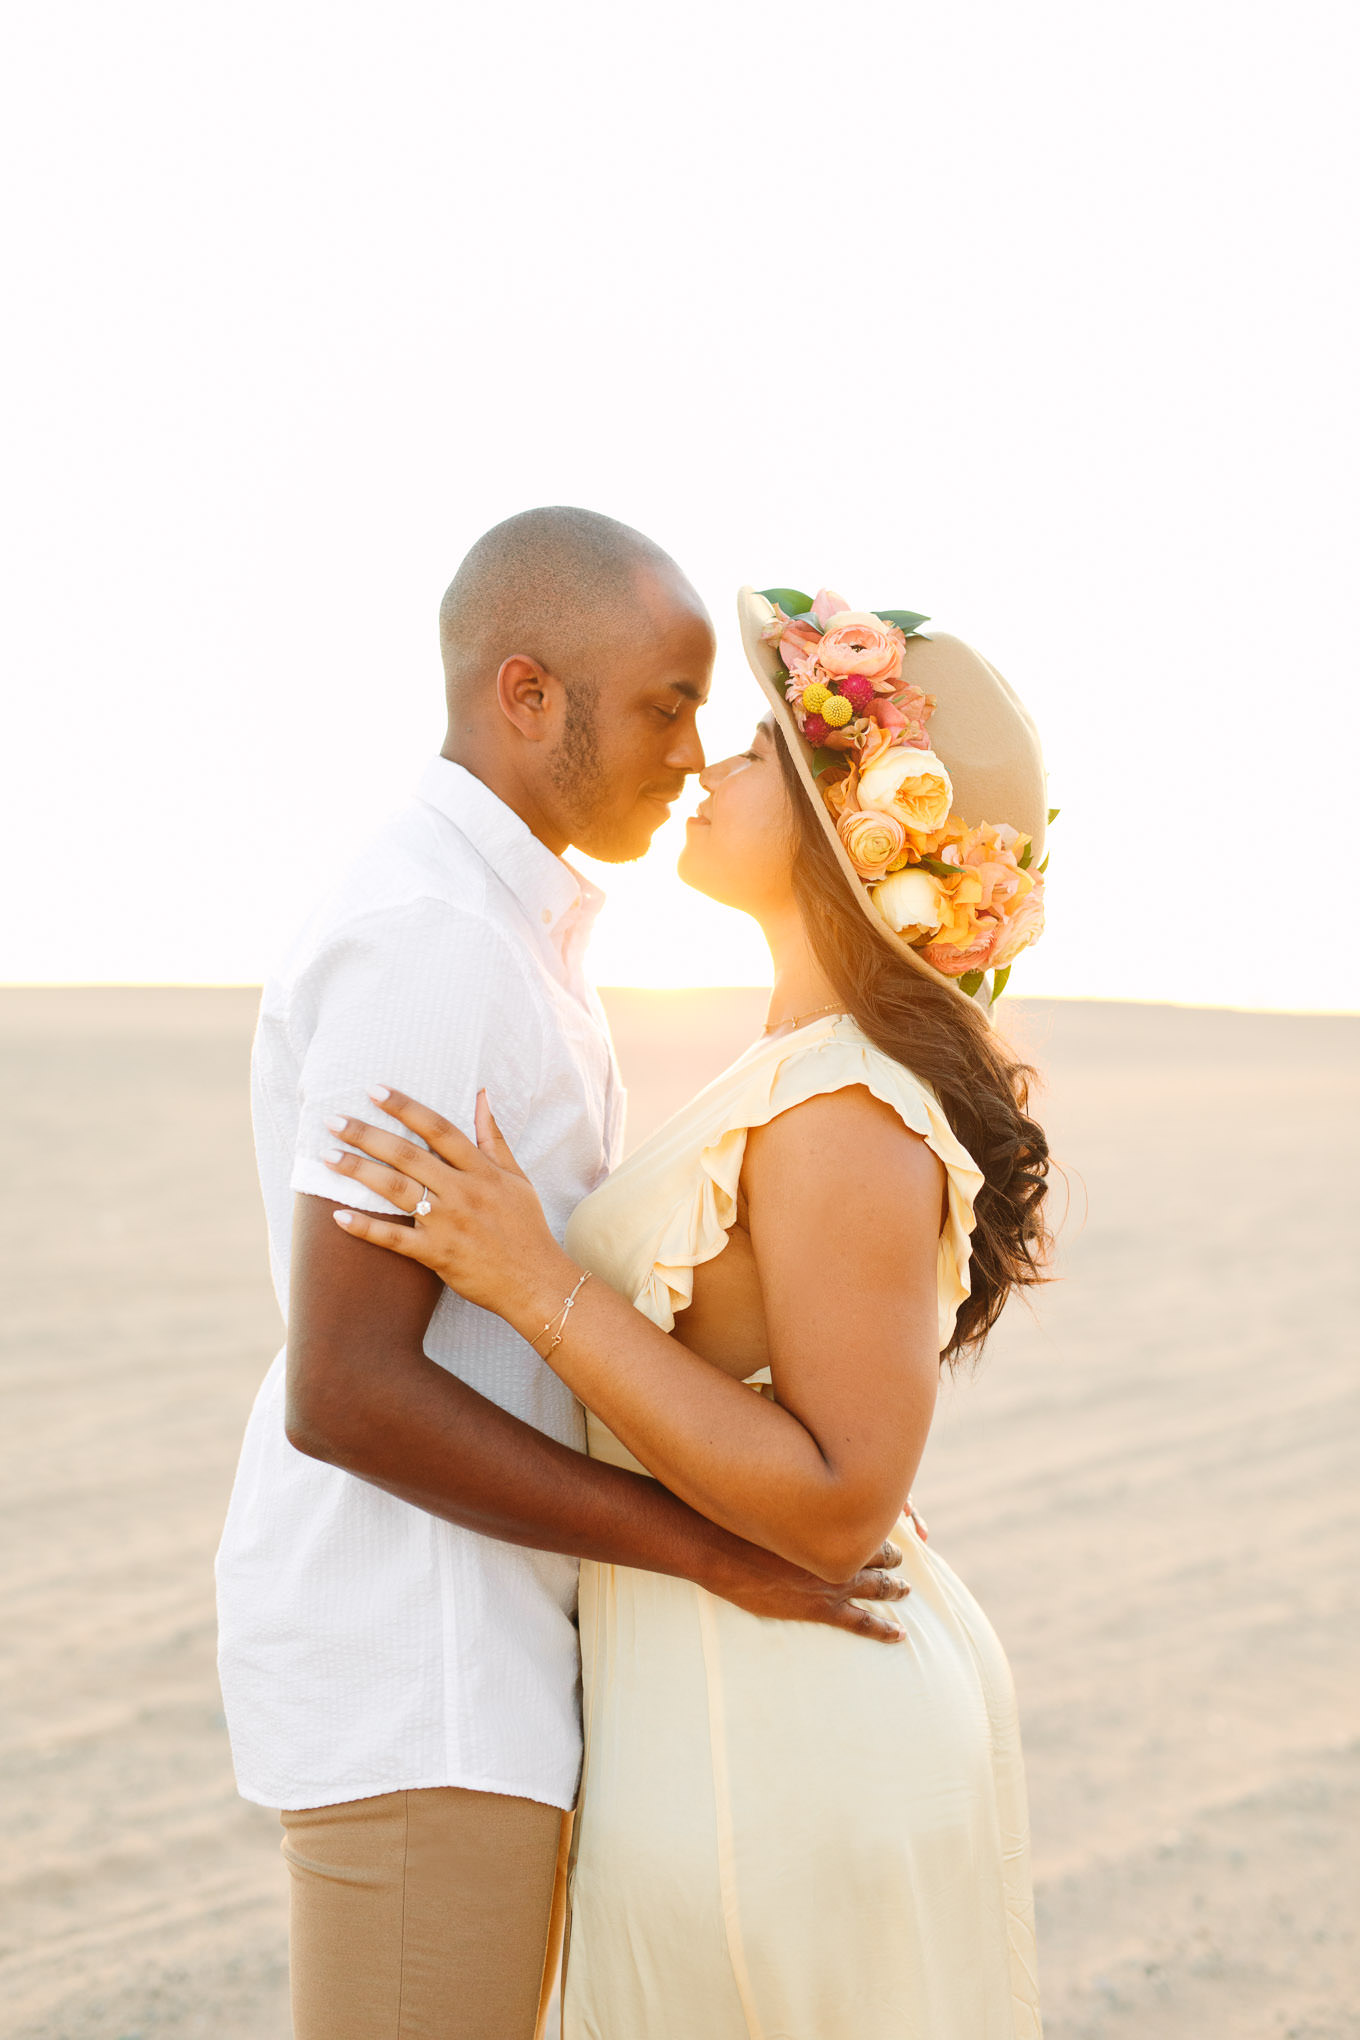 Golden hour photo of engaged couple on sand dune | California Sand Dunes engagement session | Colorful Palm Springs wedding photography | #palmspringsphotographer #sanddunes #engagementsession #southerncalifornia  Source: Mary Costa Photography | Los Angeles